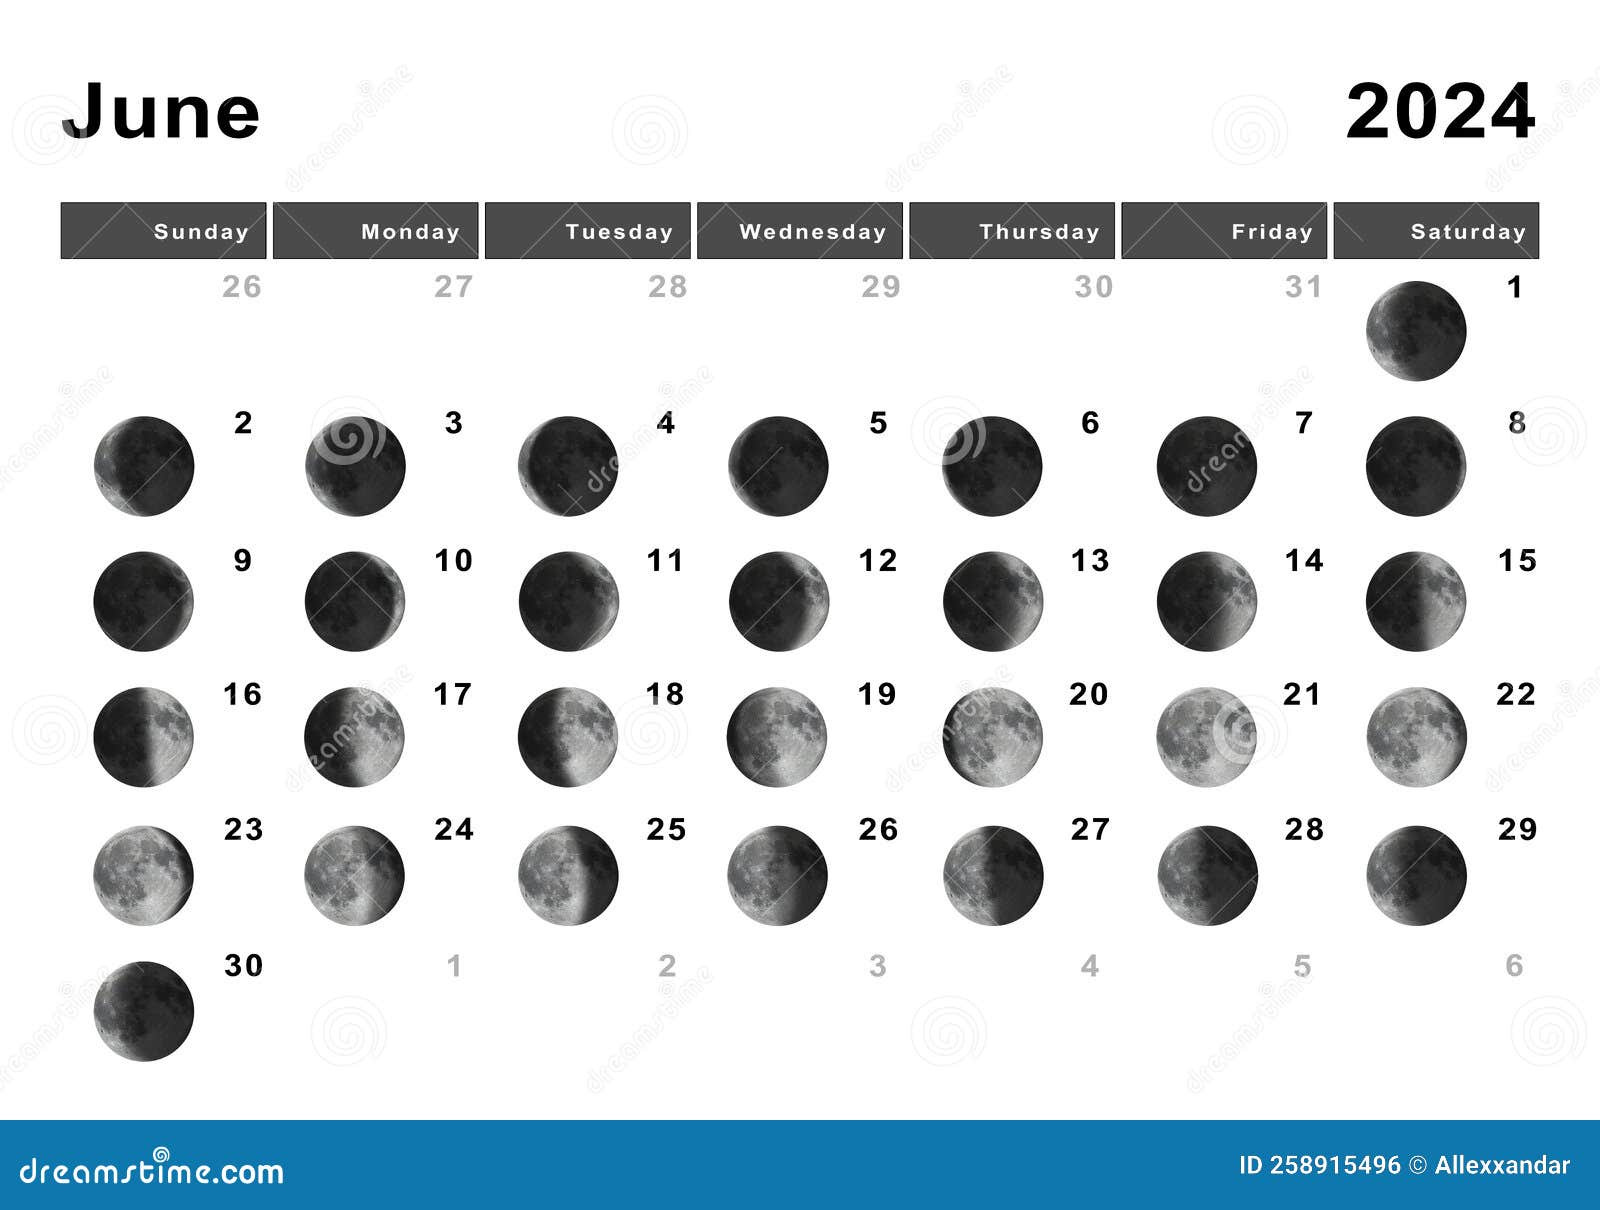 June 2024 Lunar Calendar, Moon Cycles Stock Illustration with regard to June 2024 Calendar With Moon Phases